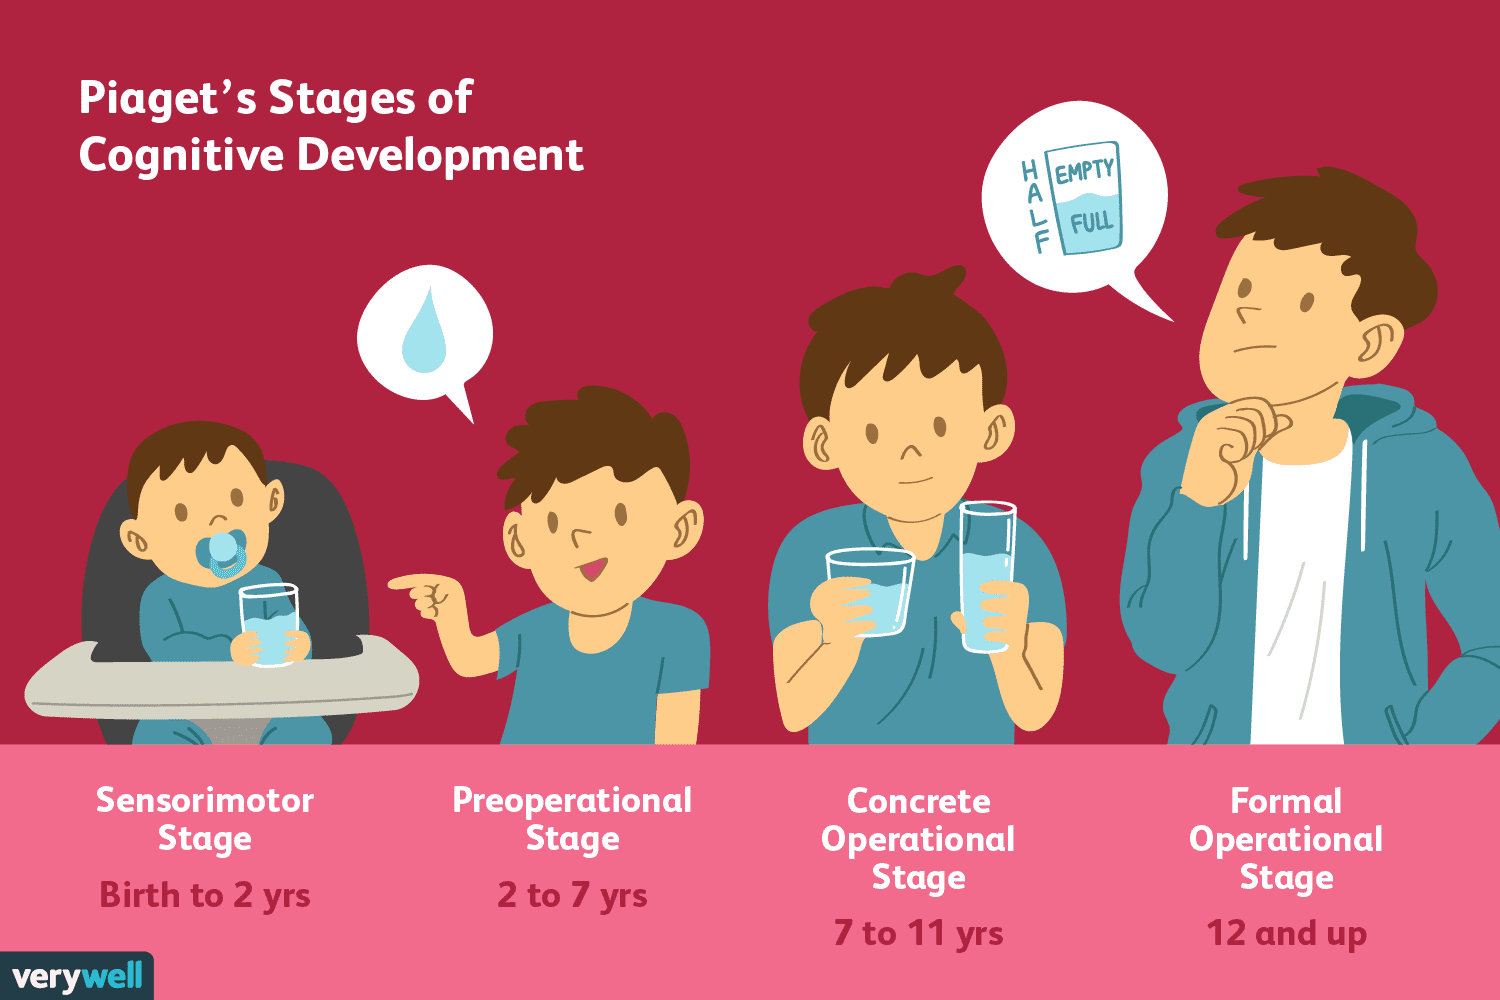 Piaget's stages of cognitive development in education, illustrating the progression from the sensorimotor stage to the formal operational stage.